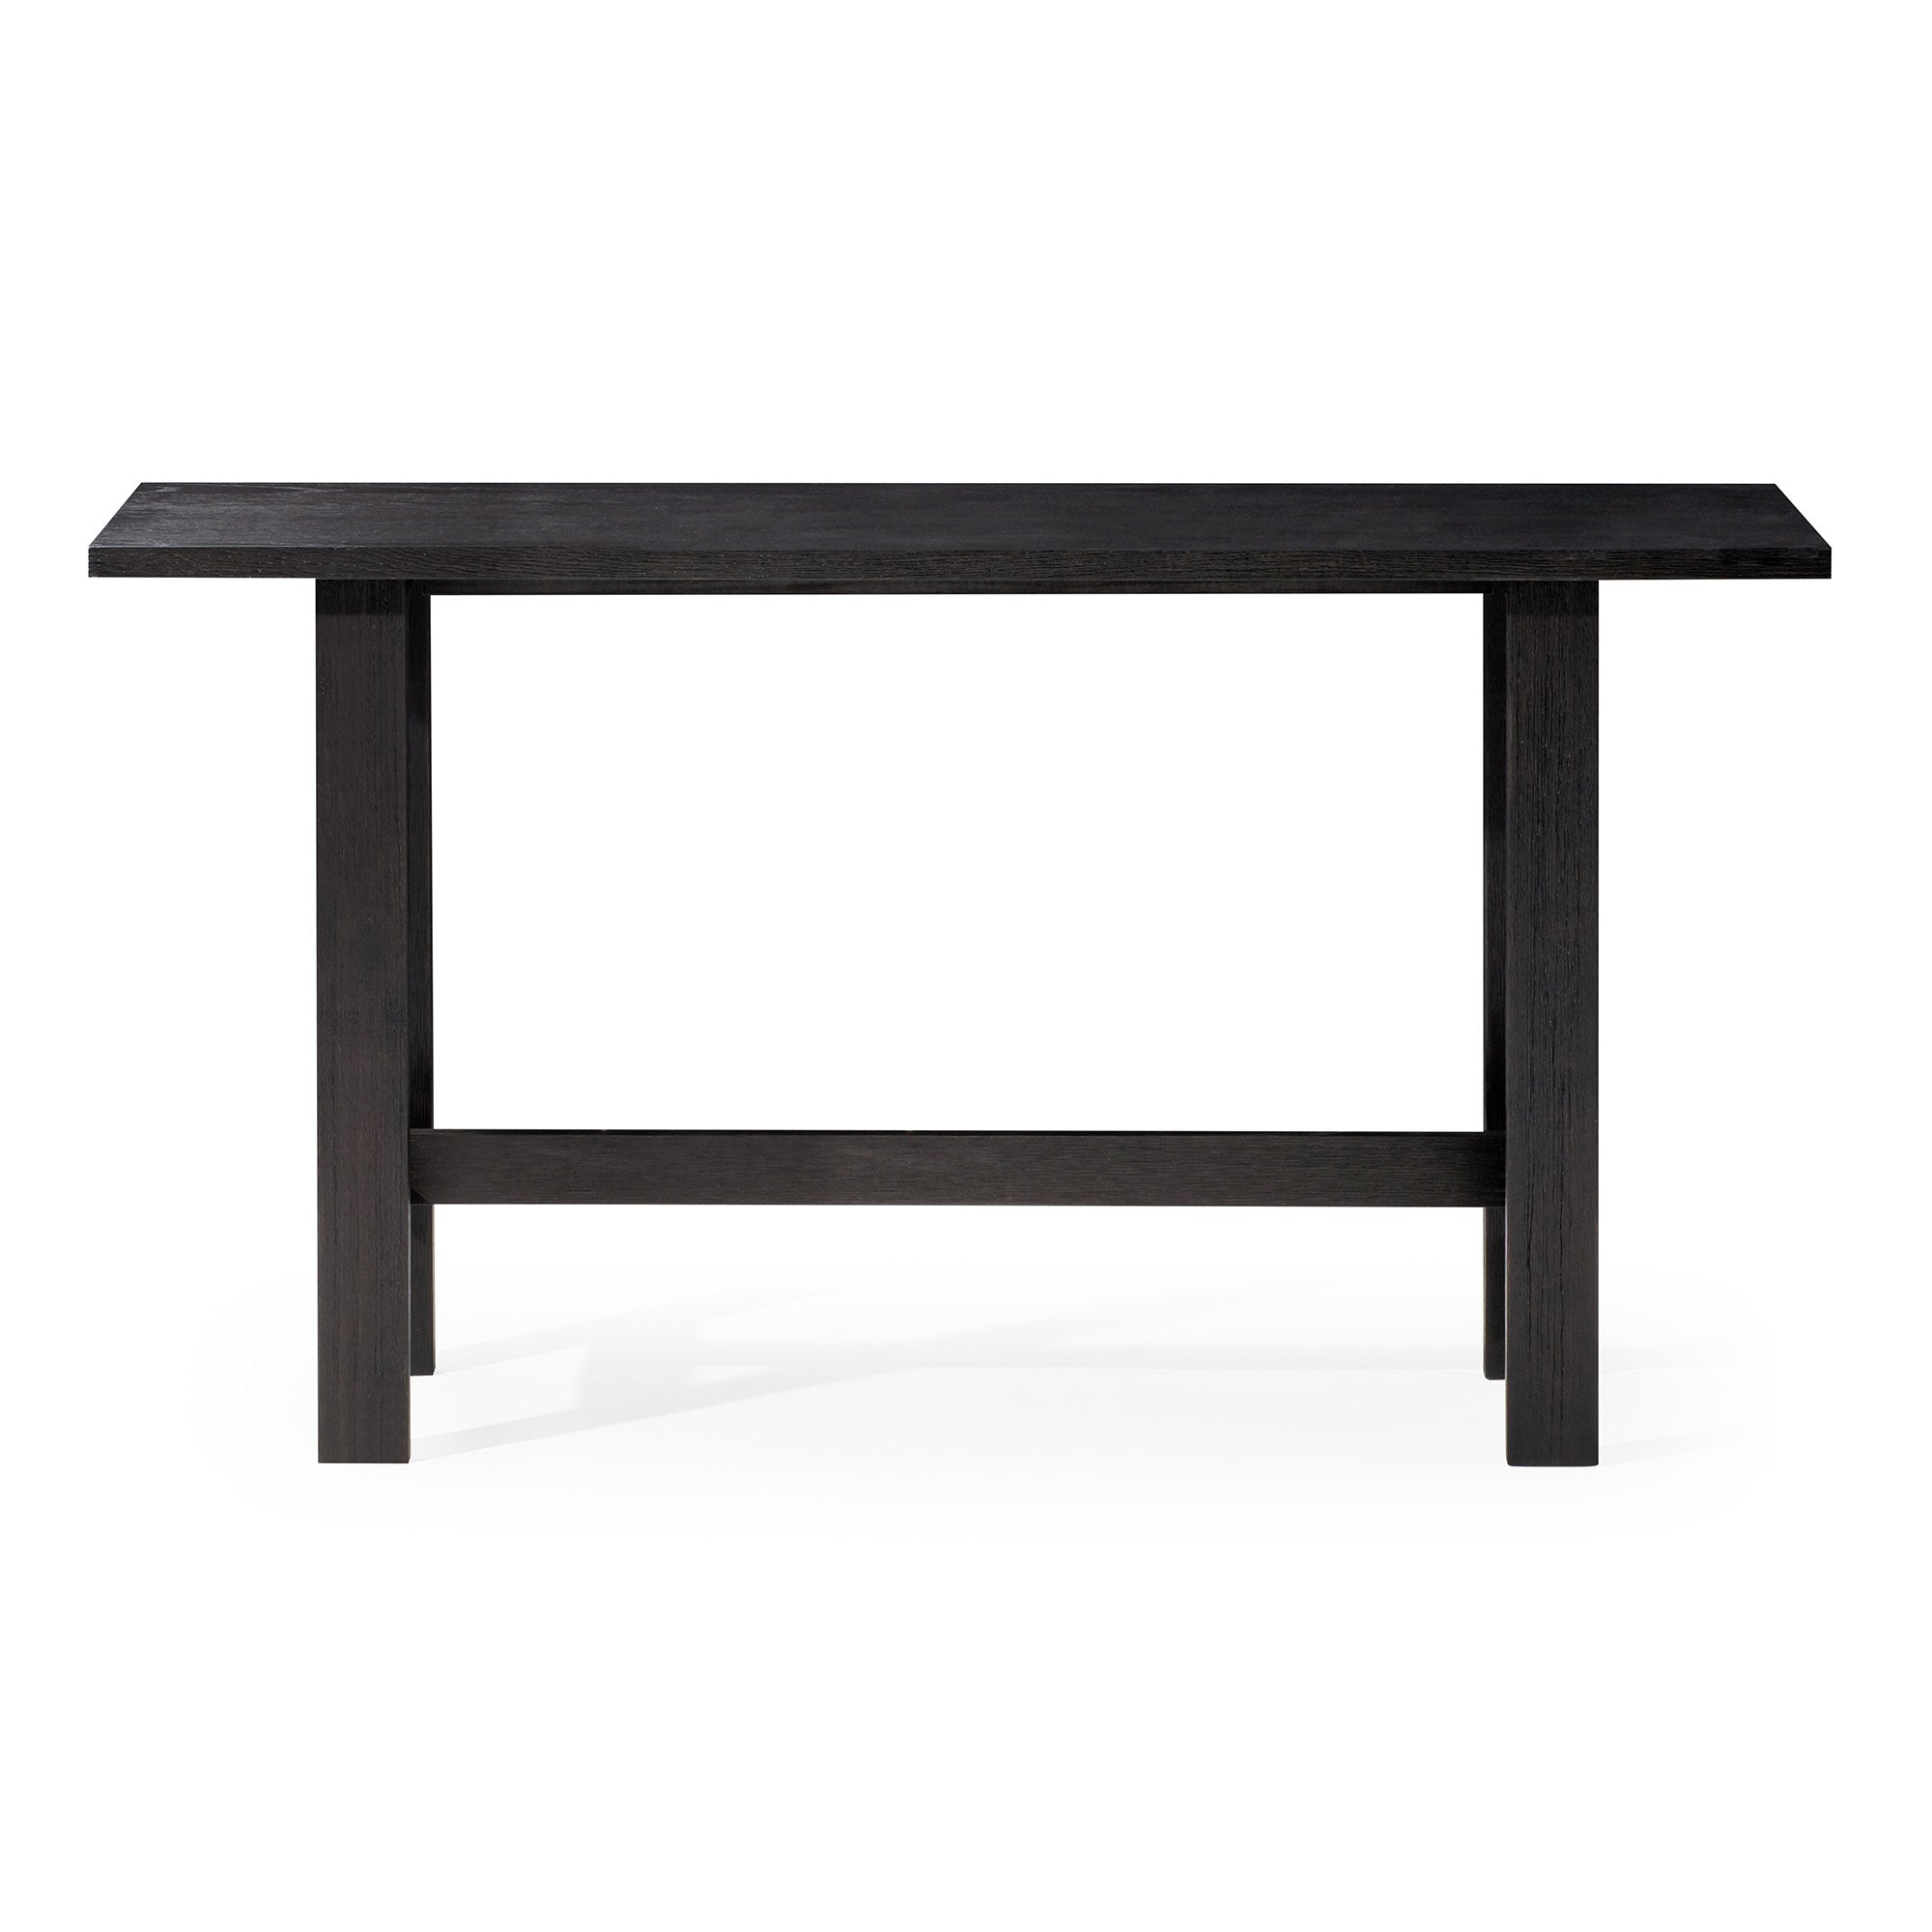 Hera Modern Wooden Console Table in Weathered Black Finish